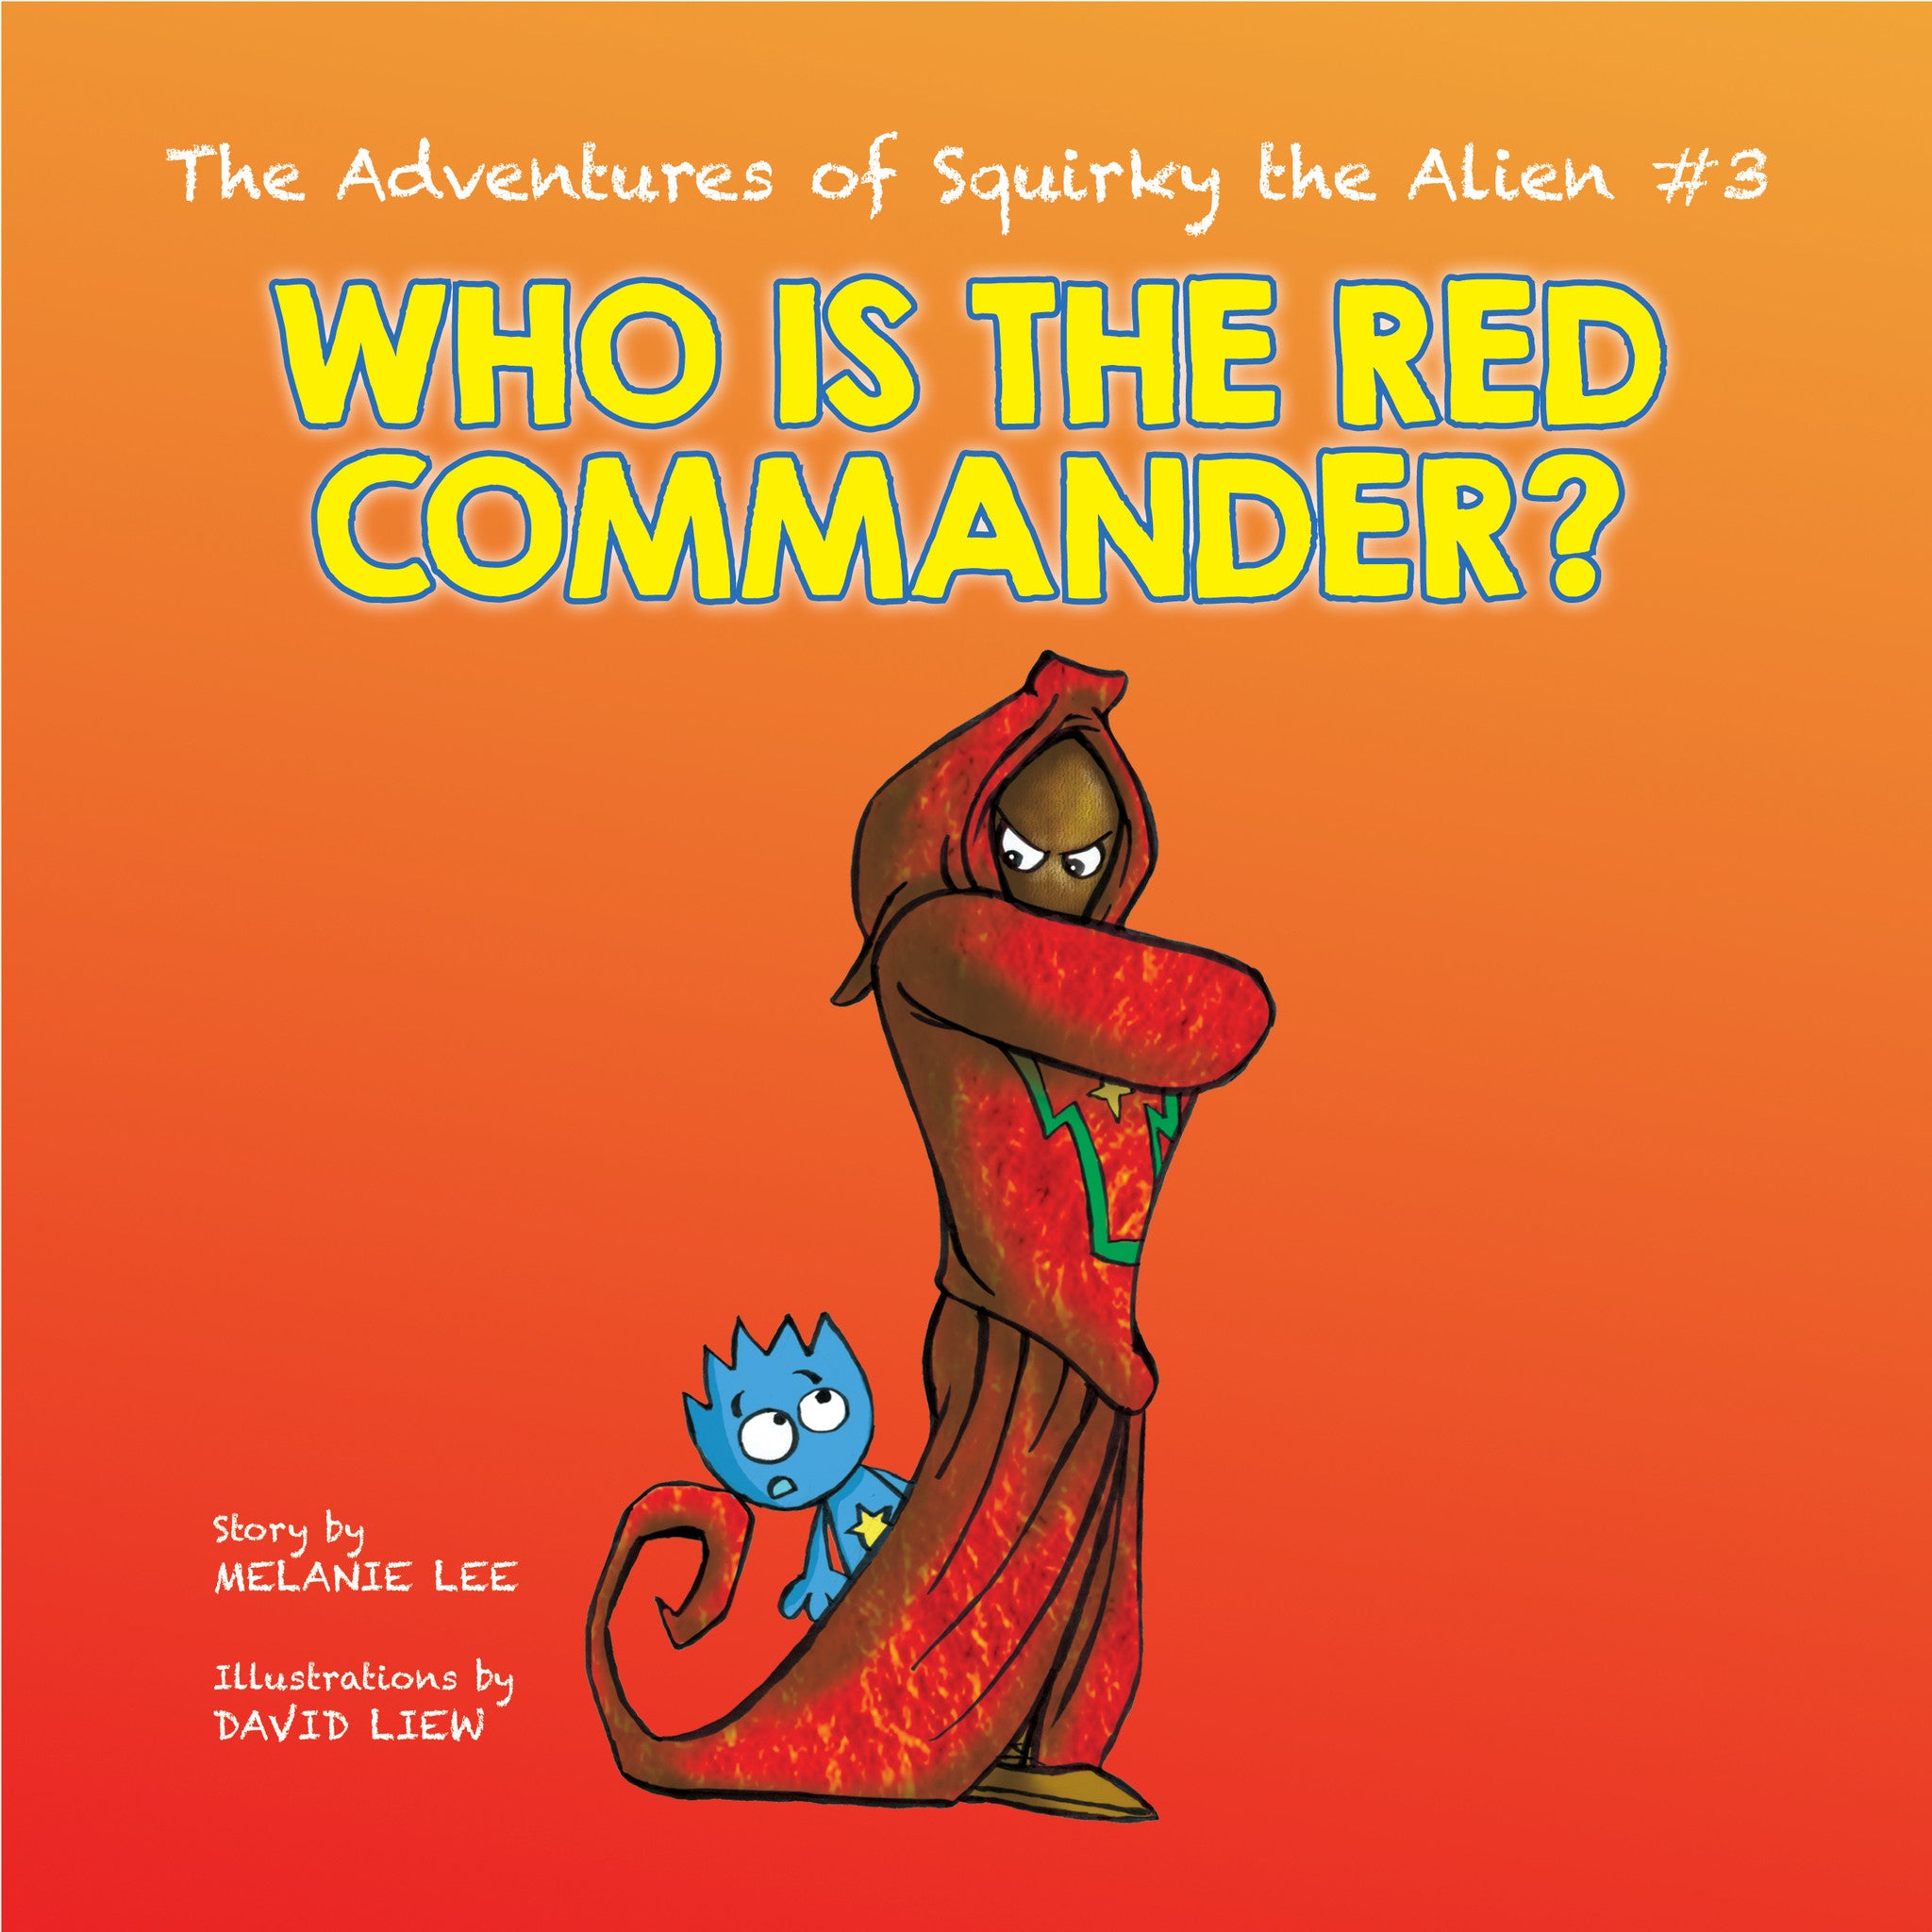 The Adventures of Squirky the Alien #3 - Who is the Red Commander?